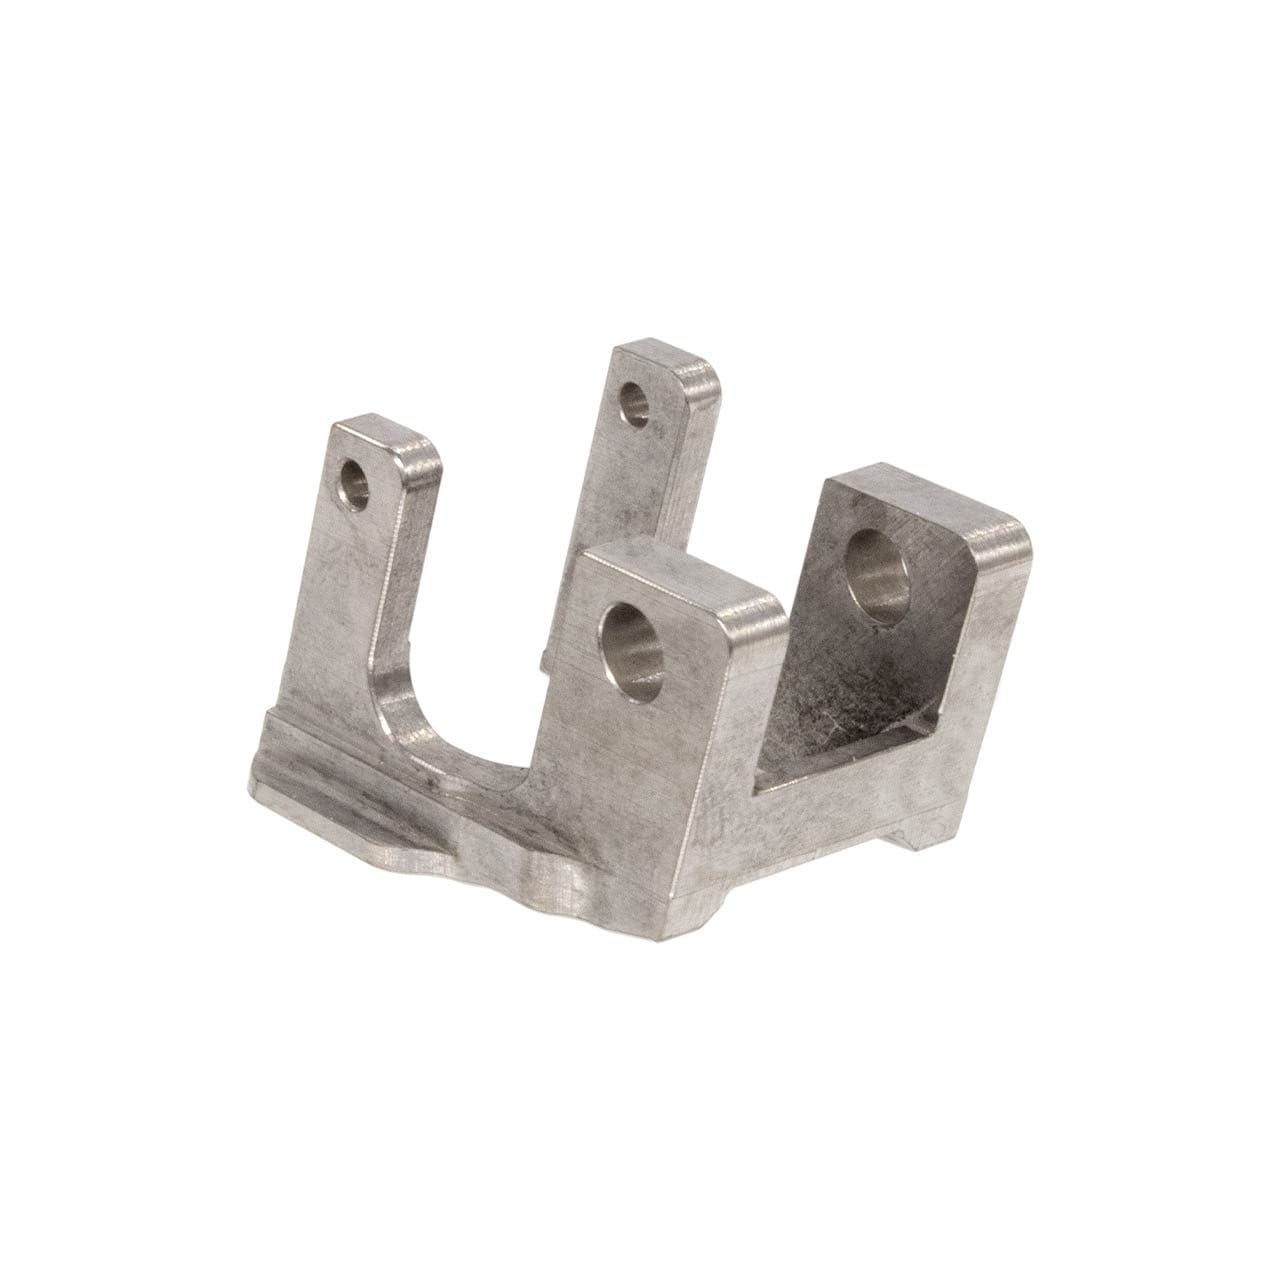 Image of ROOK Tactical Front Locking Block Upgrade (Polymer80 PF940SC) - Stainless Steel